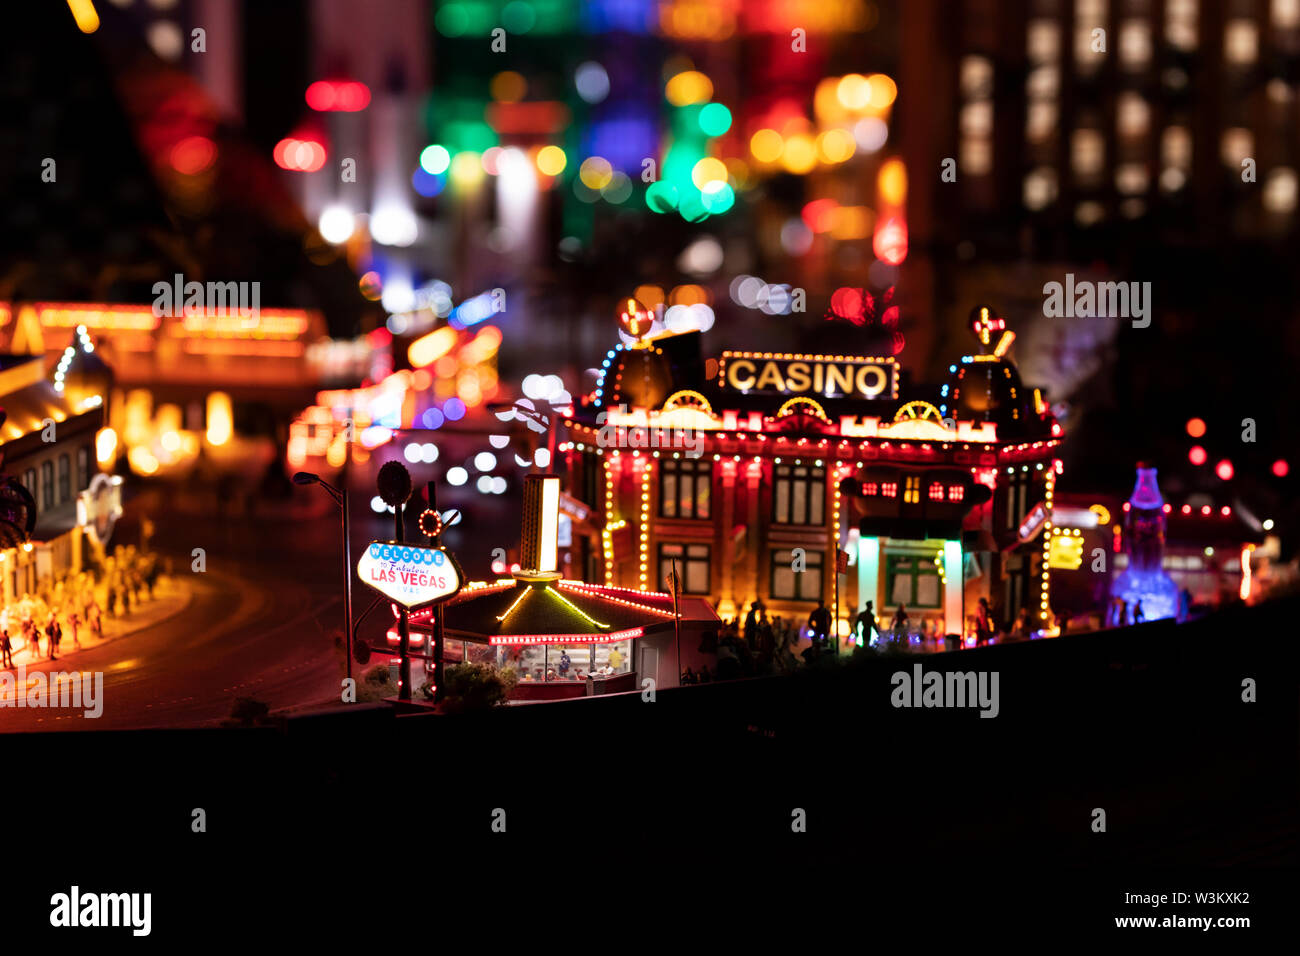 A replica of nighttime at a Las Vegas casino at the model railway exhibit Miniatur Wunderland in Hamburg, Germany. Stock Photo